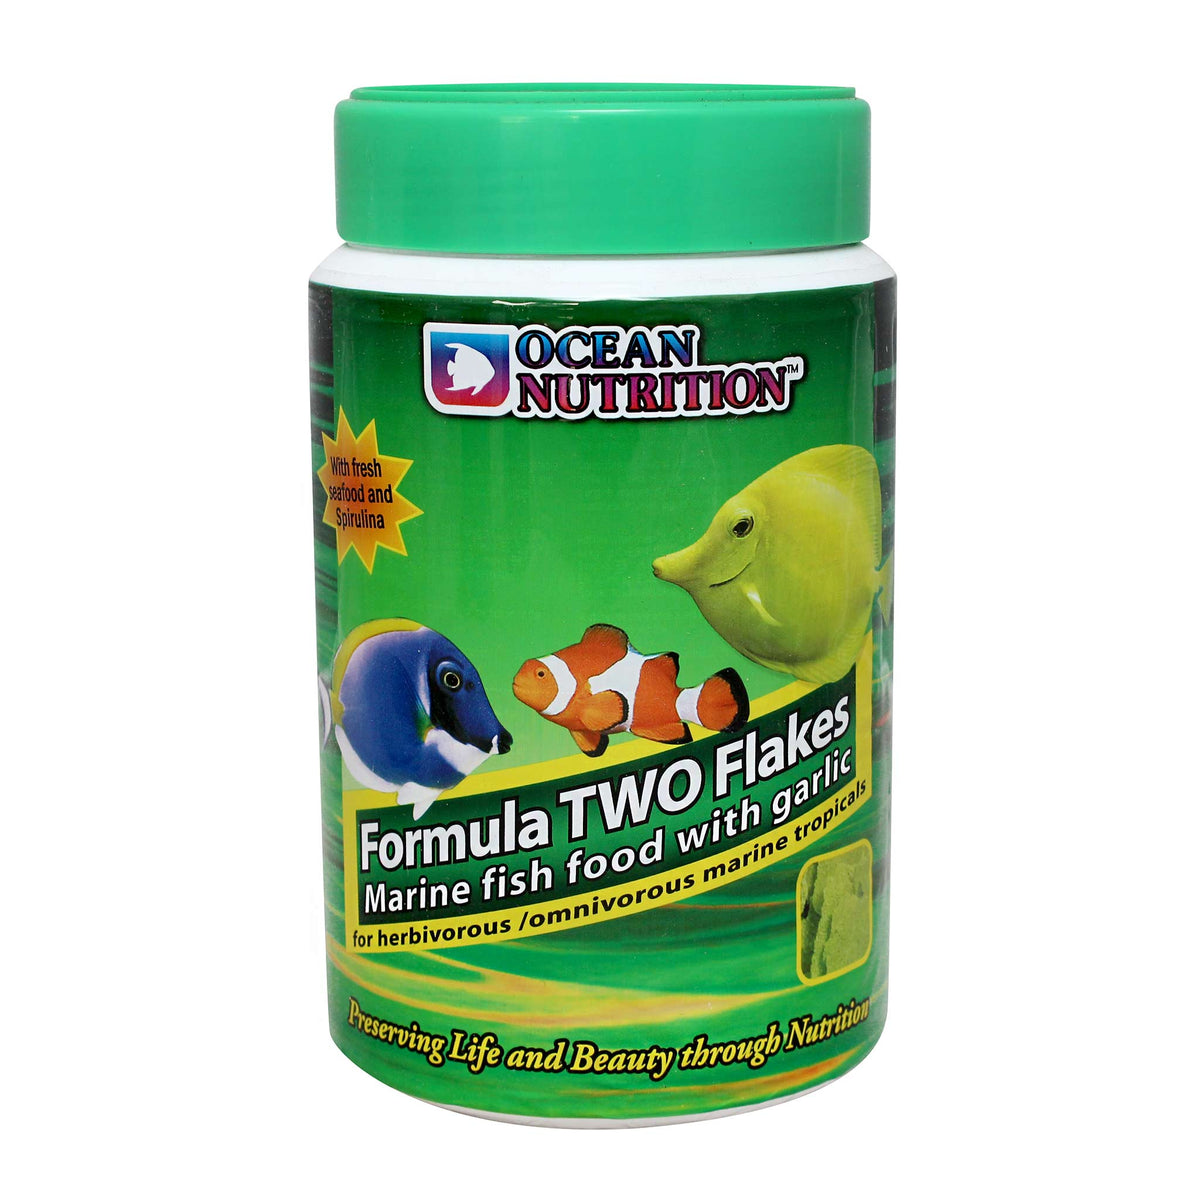 Ocean Nutrition Formula Two Flakes for Marine Fish